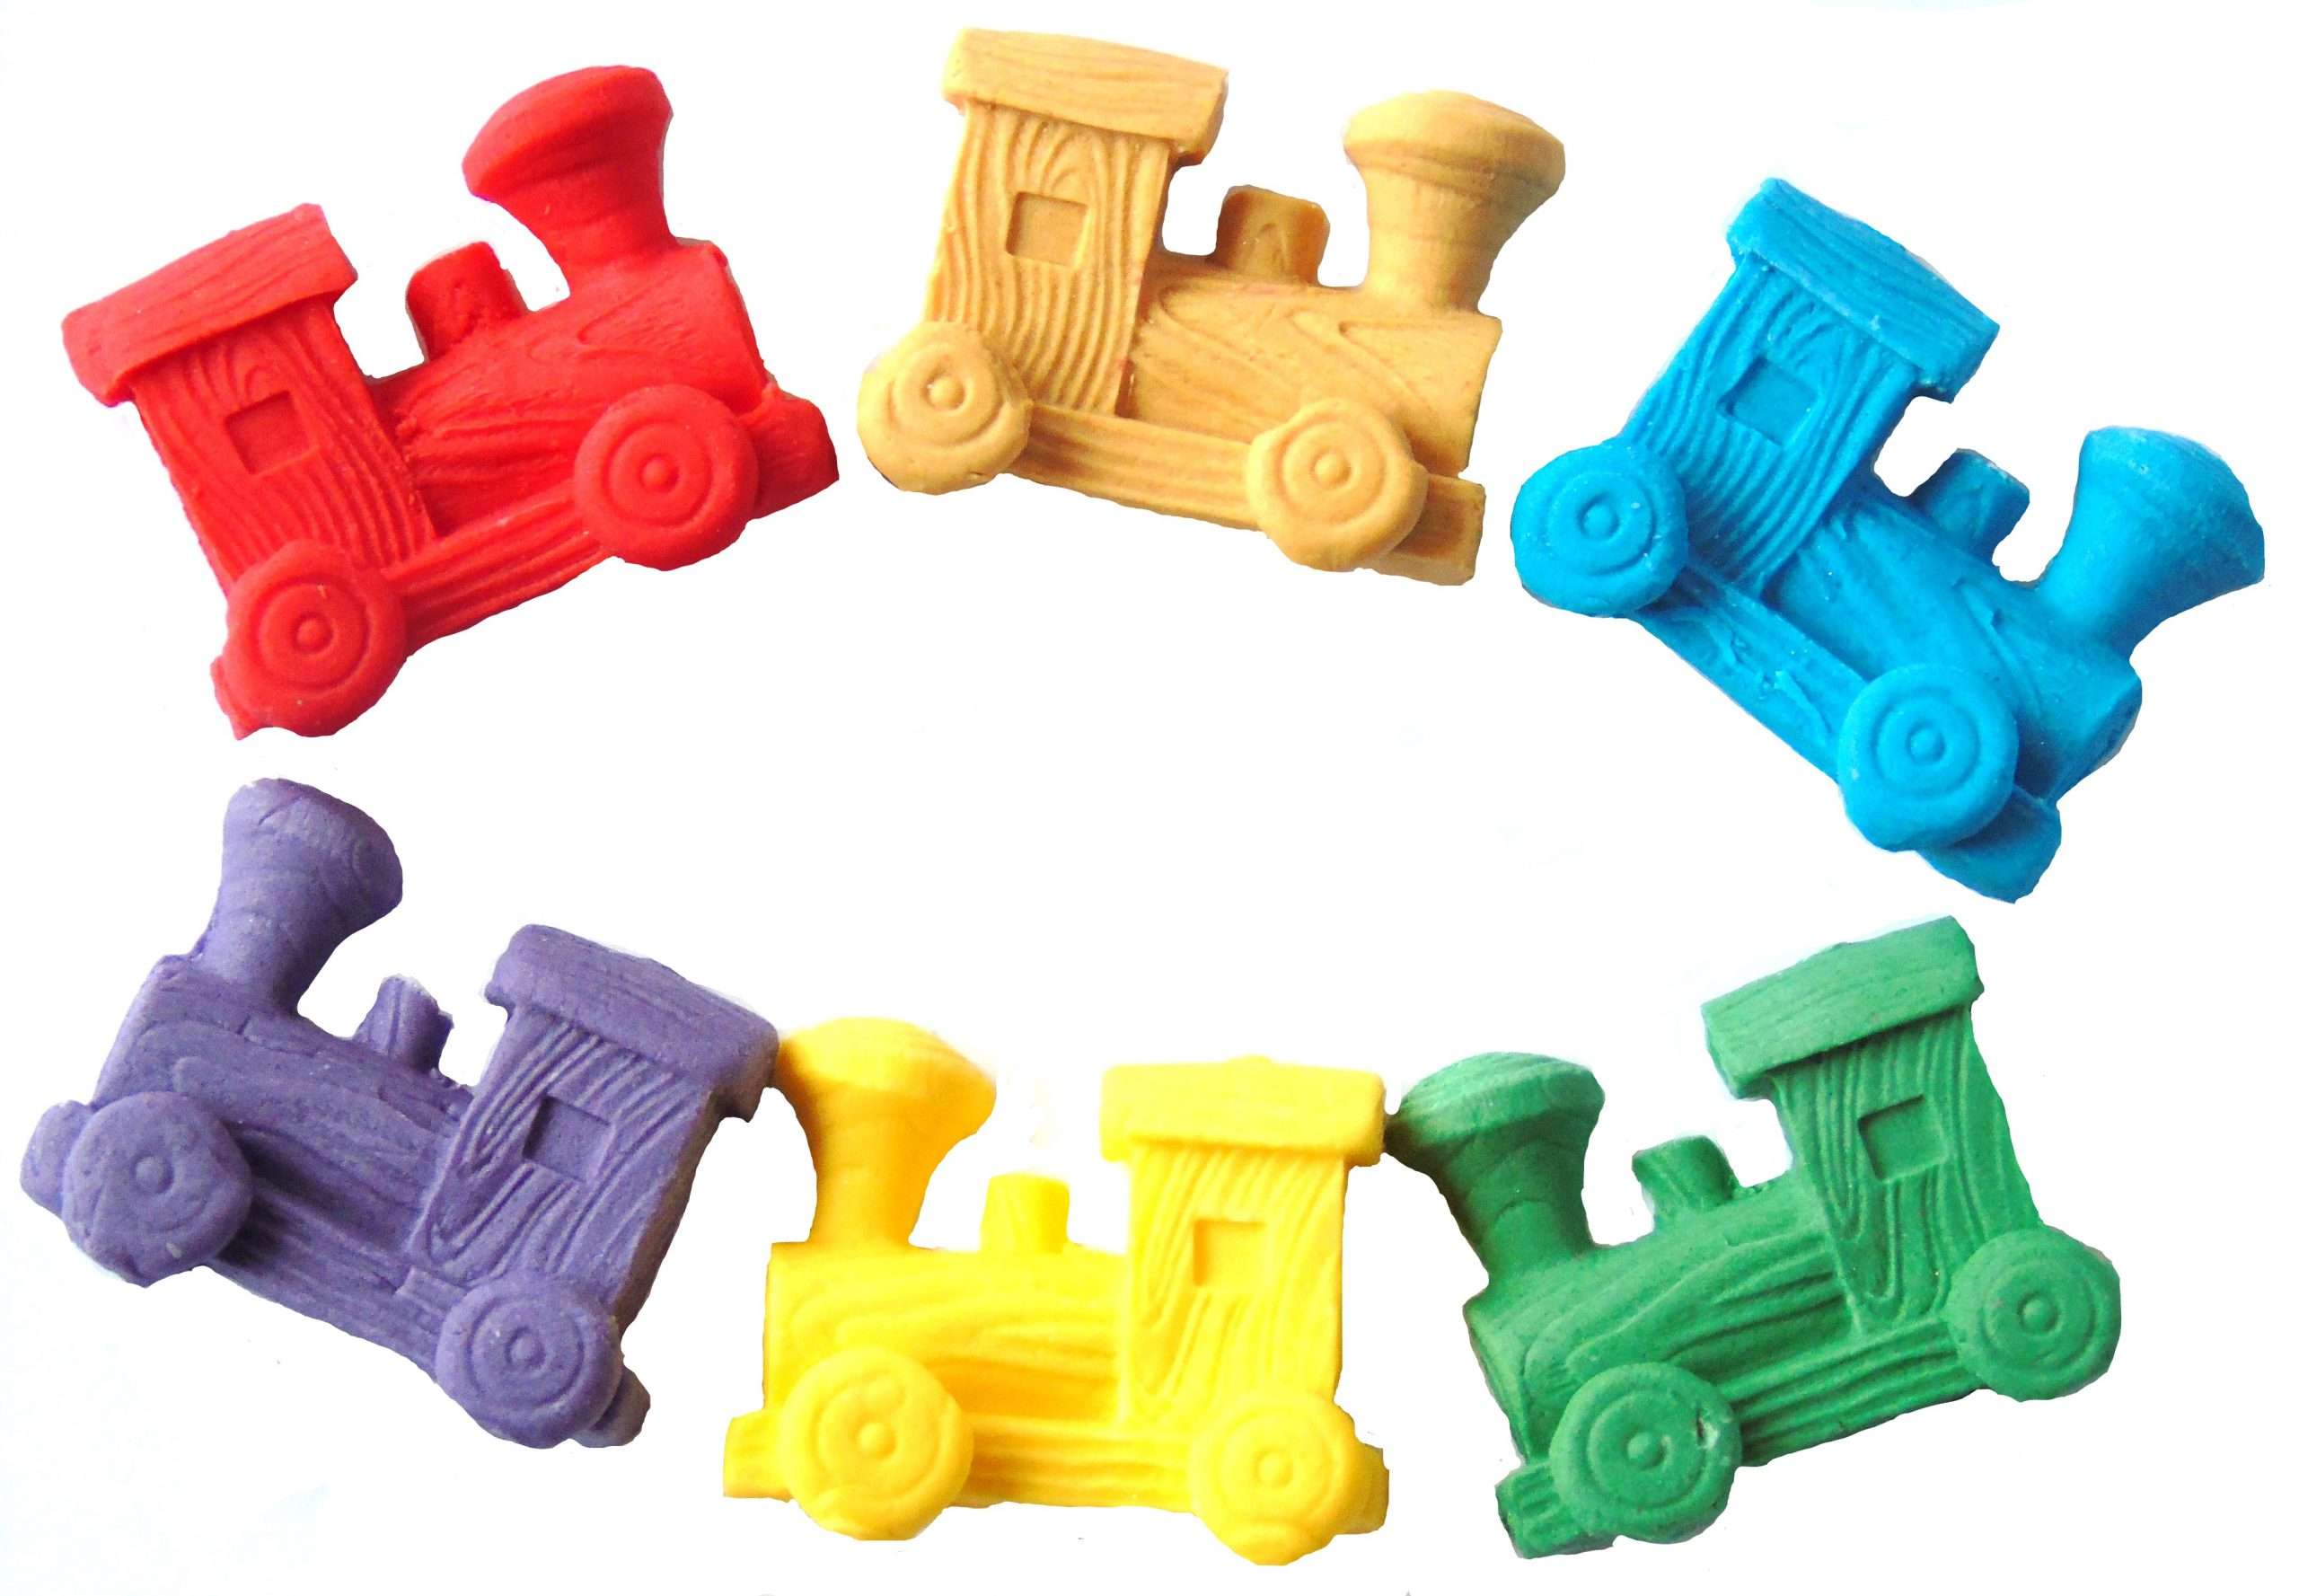 Inked620trains201 LI scaled Our chunkiest train cake toppers are ideal for the train enthusiast in the family, for a birthday or even a baby shower. They are always a big hit. They come in a mix of red, blue, yellow, green, brown and Beige. A colourful array of novelty edible trains. Ideal for use as cupcake toppers or cake decorations and are suitable for birthdays as well as baby showers. Approx Size: 4.5cm to 4cm